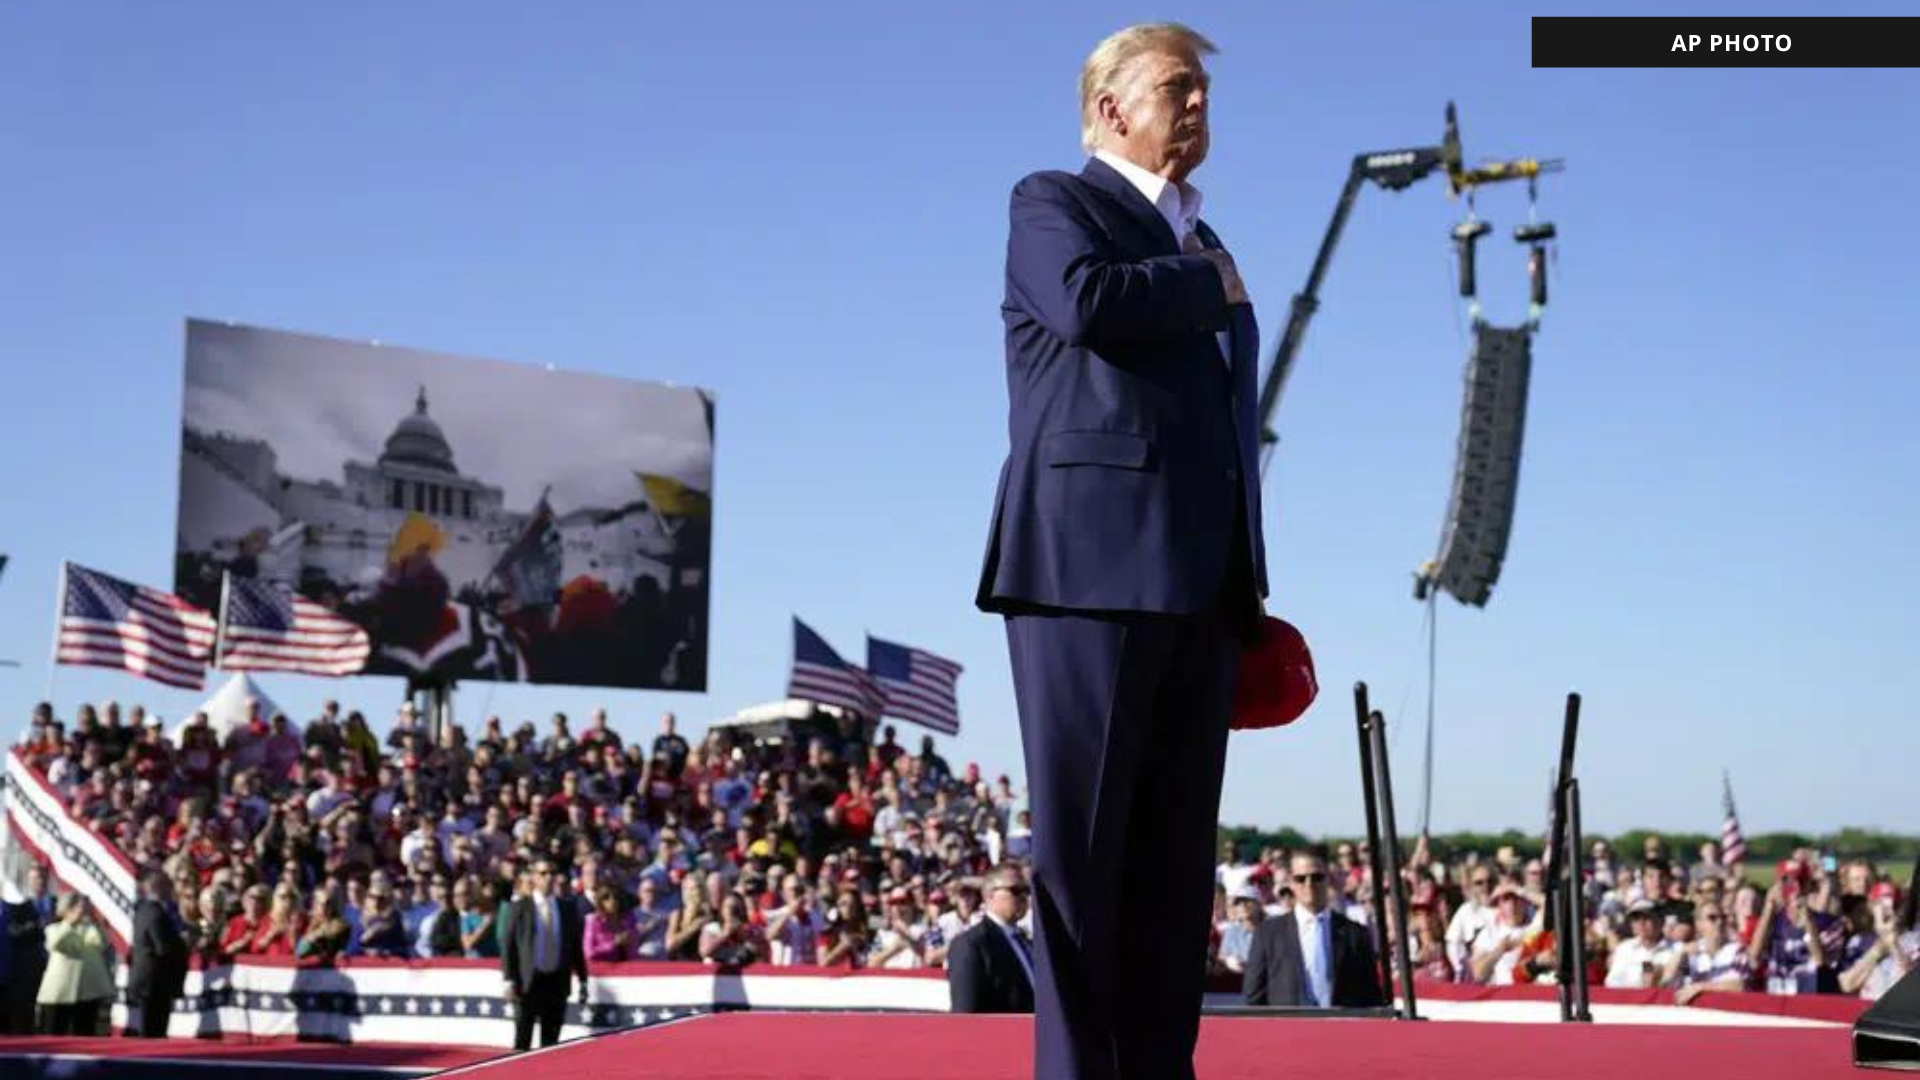 Trump, Facing Potential Indictment, Holds Defiant Waco Rally